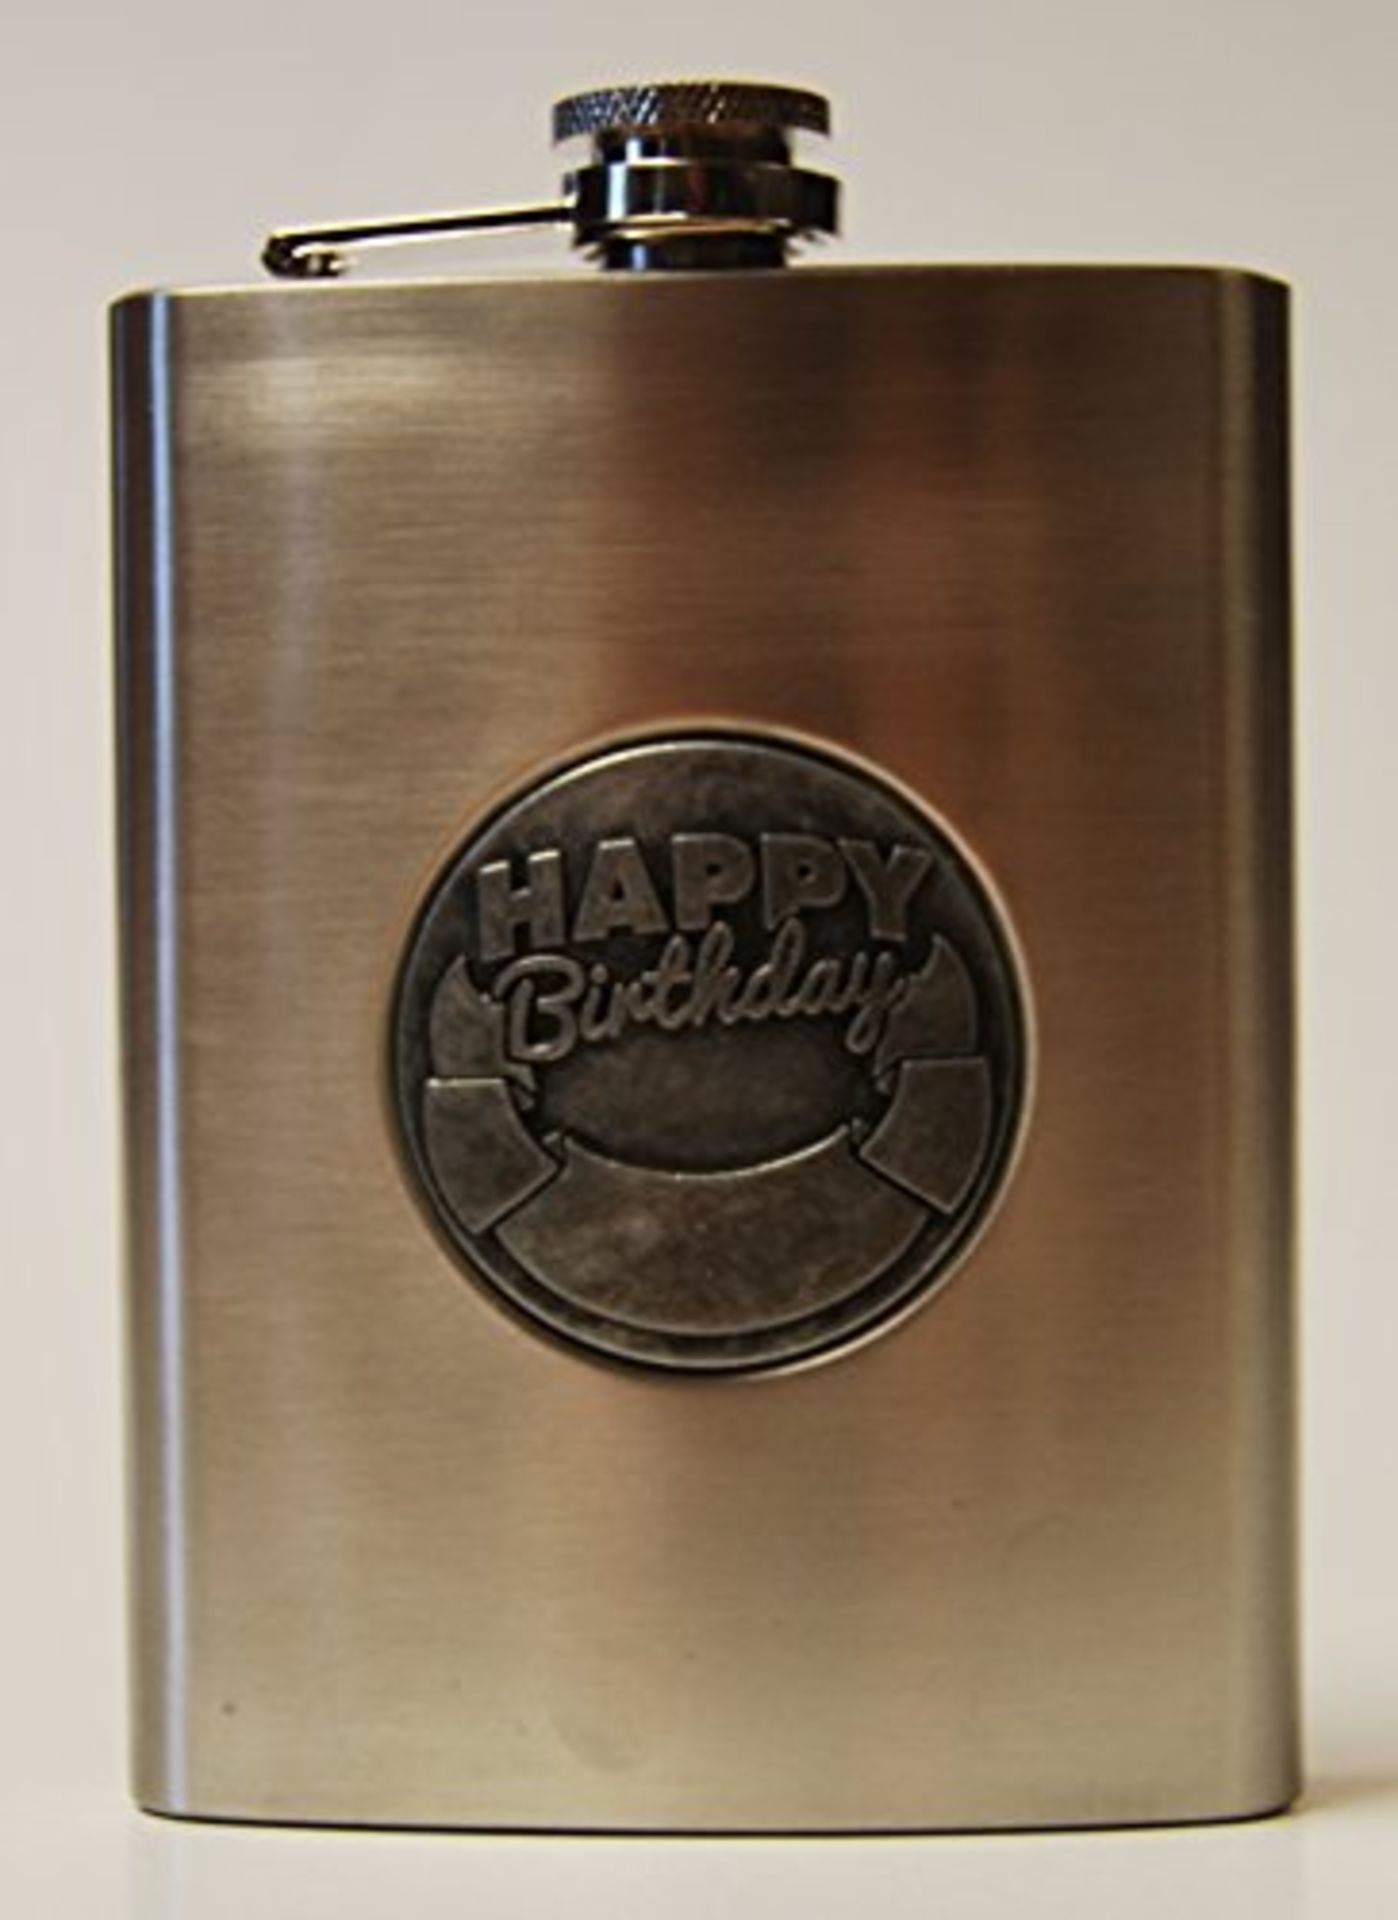 V *TRADE QTY* Brand New Happy Birthday Hip Flask X 7 YOUR BID PRICE TO BE MULTIPLIED BY SEVEN